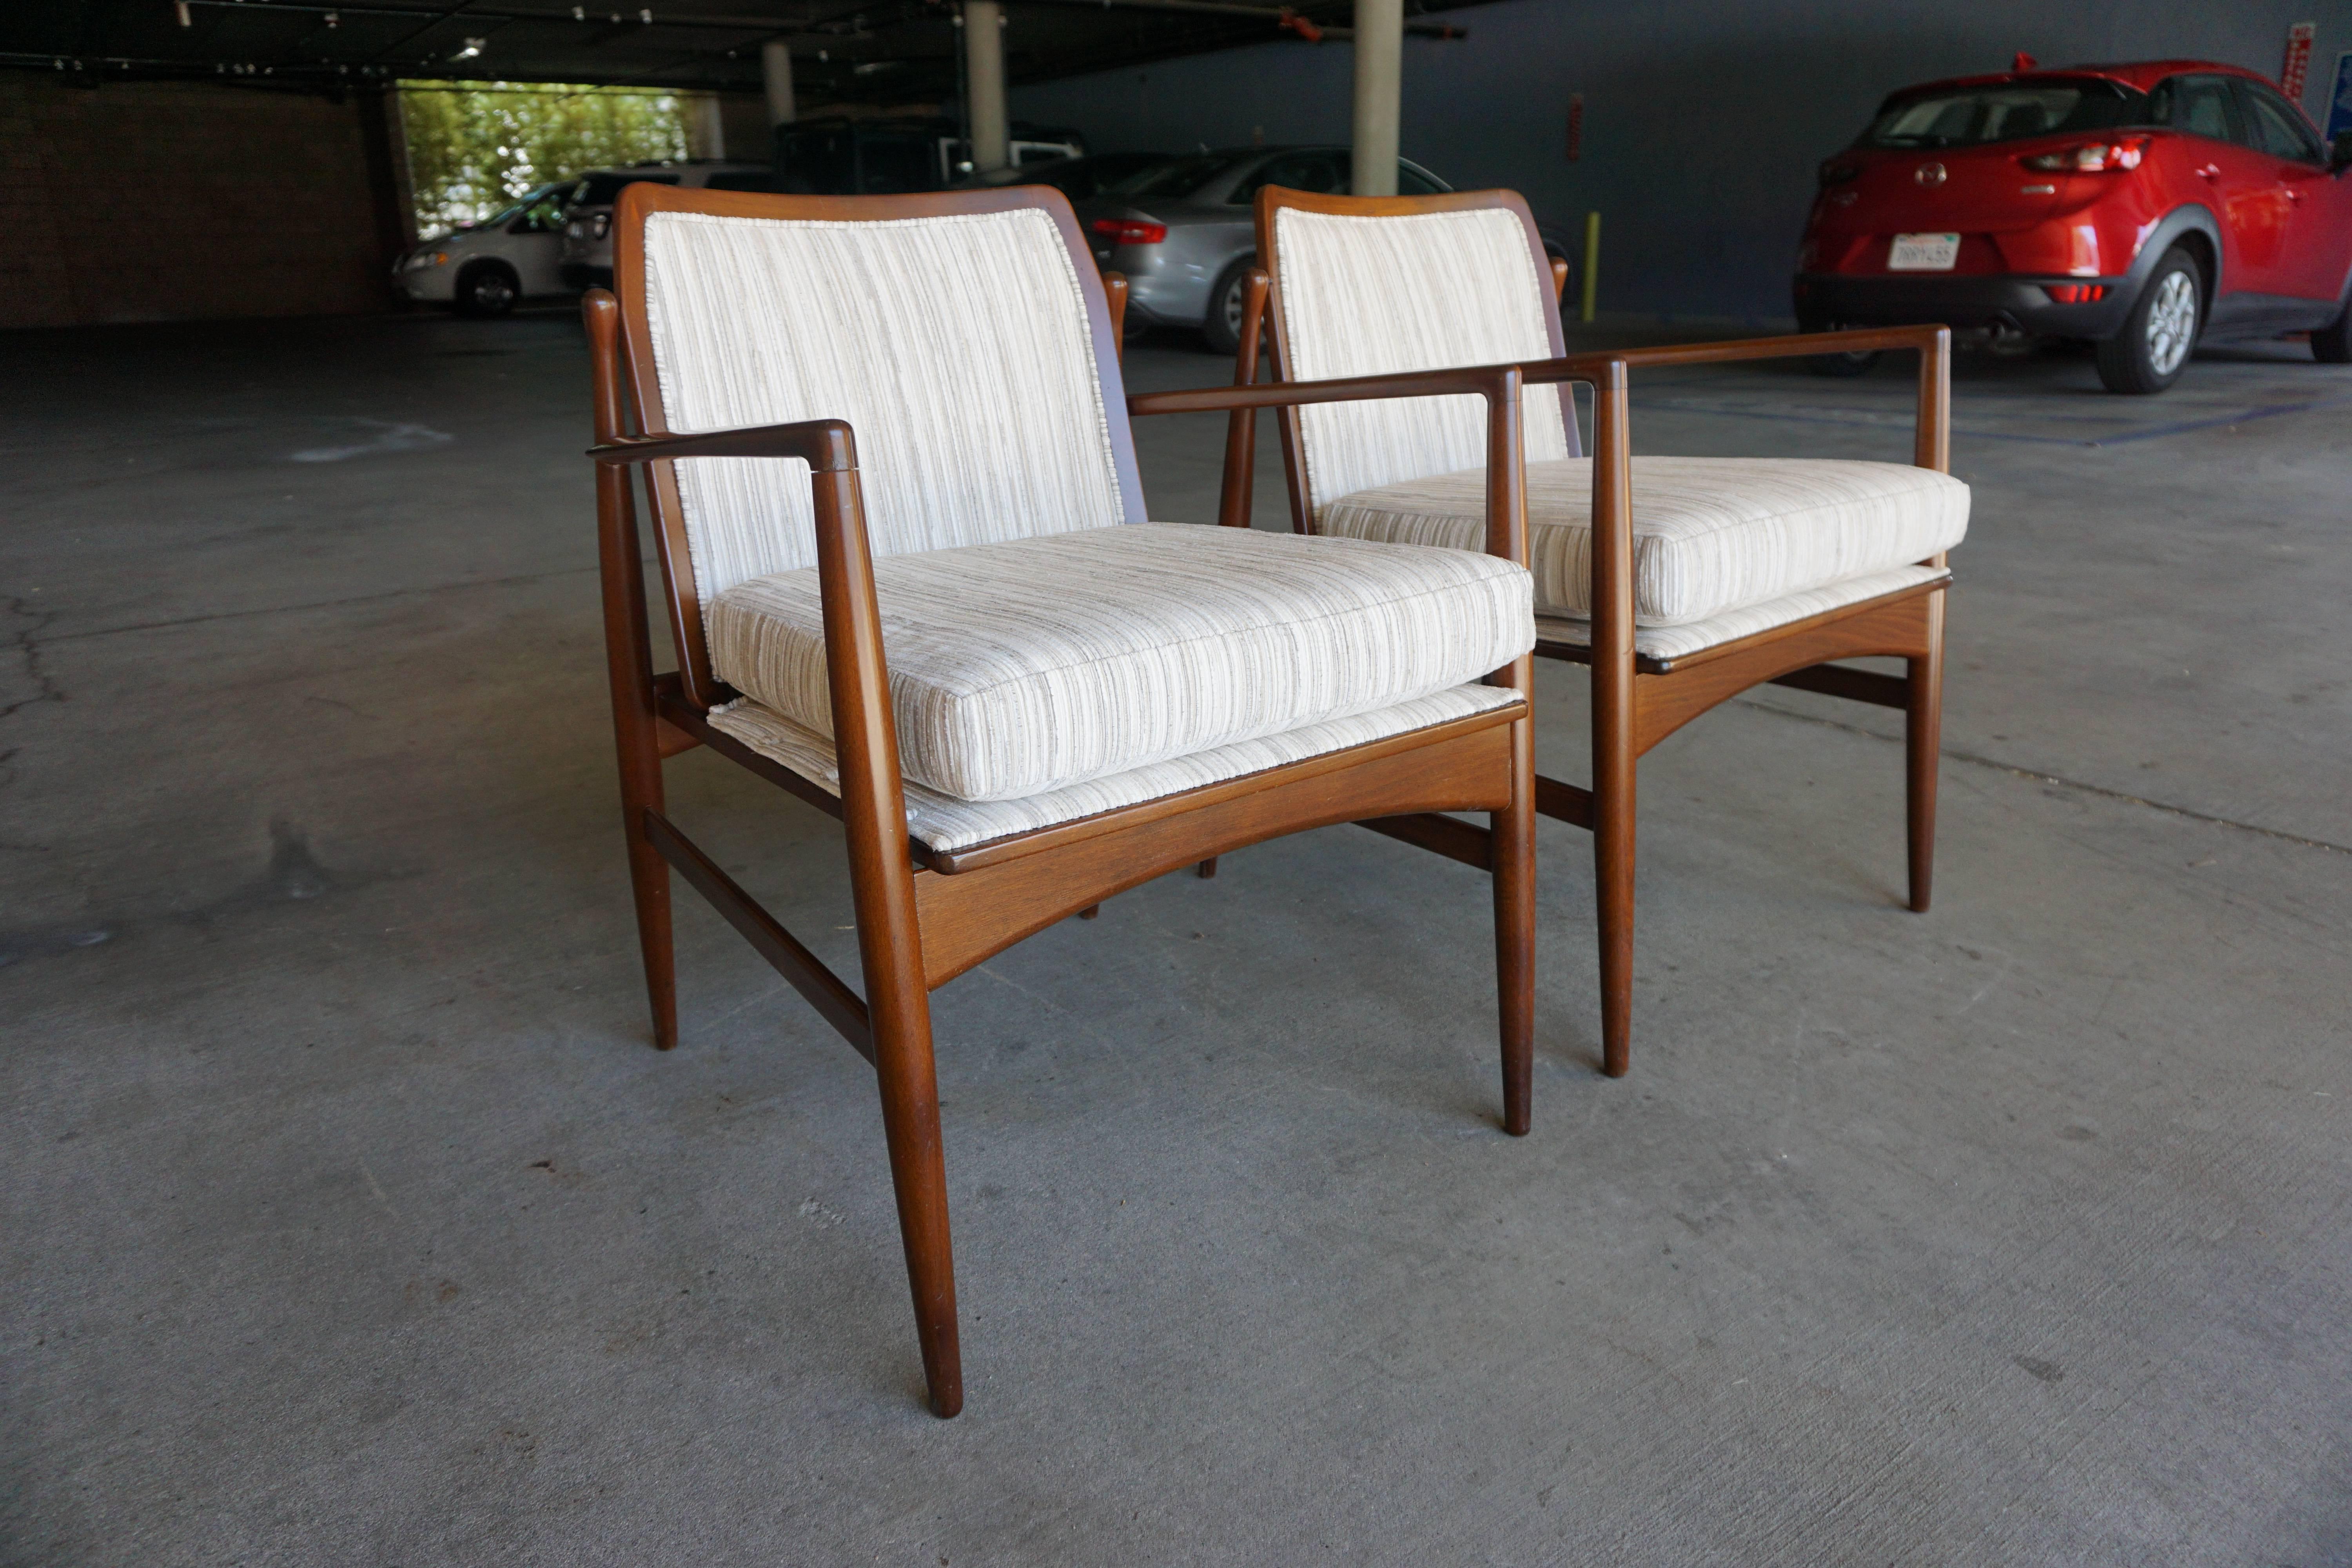 A distinctive pair of mahogany framed Danish modern armchairs from the 1960s. The handsome pair has been newly reupholstered in a high quality tan/gray striped fabric.